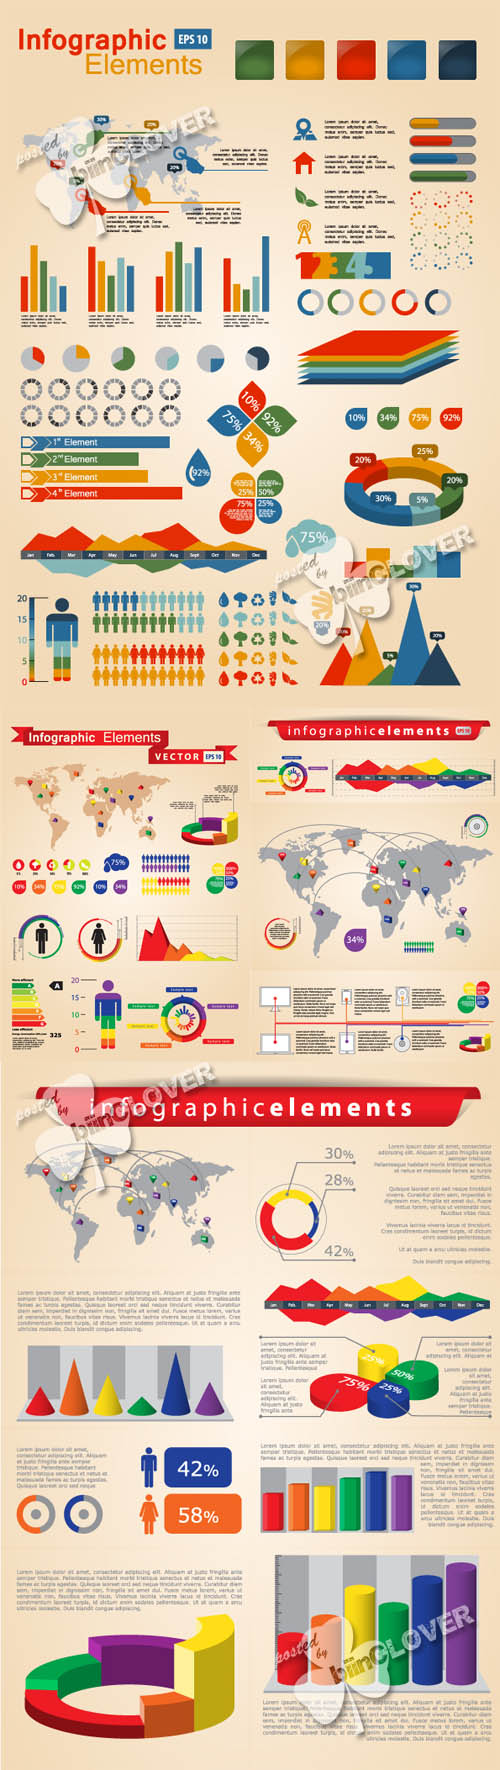 Set of infographic elements 0173